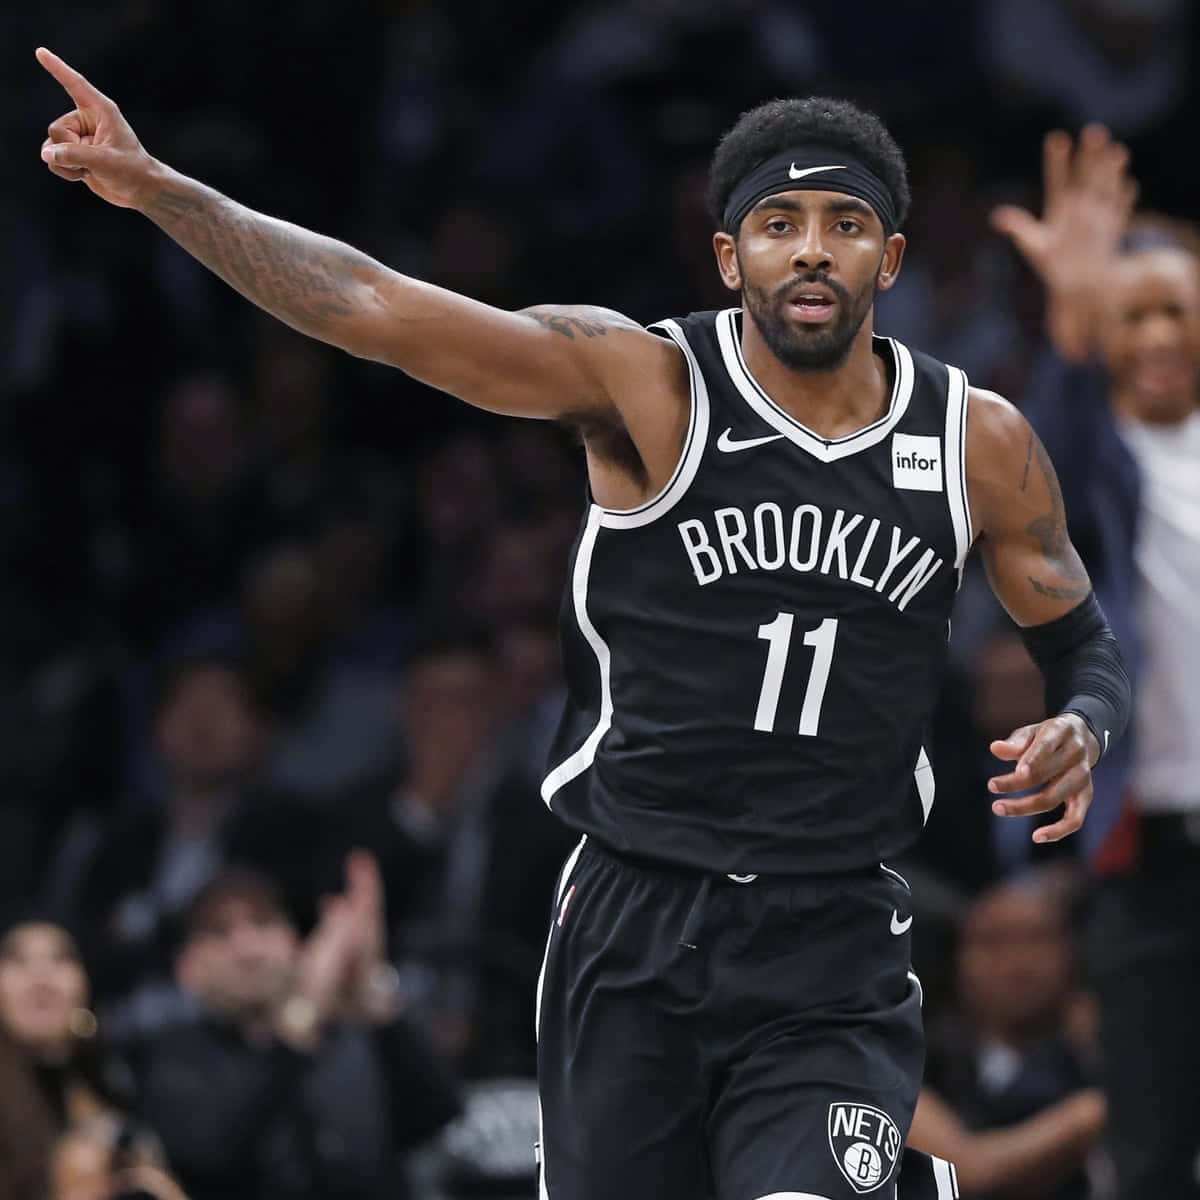 Kyrie Irving of the Brooklyn Nets playing at Barclays Center Wallpaper